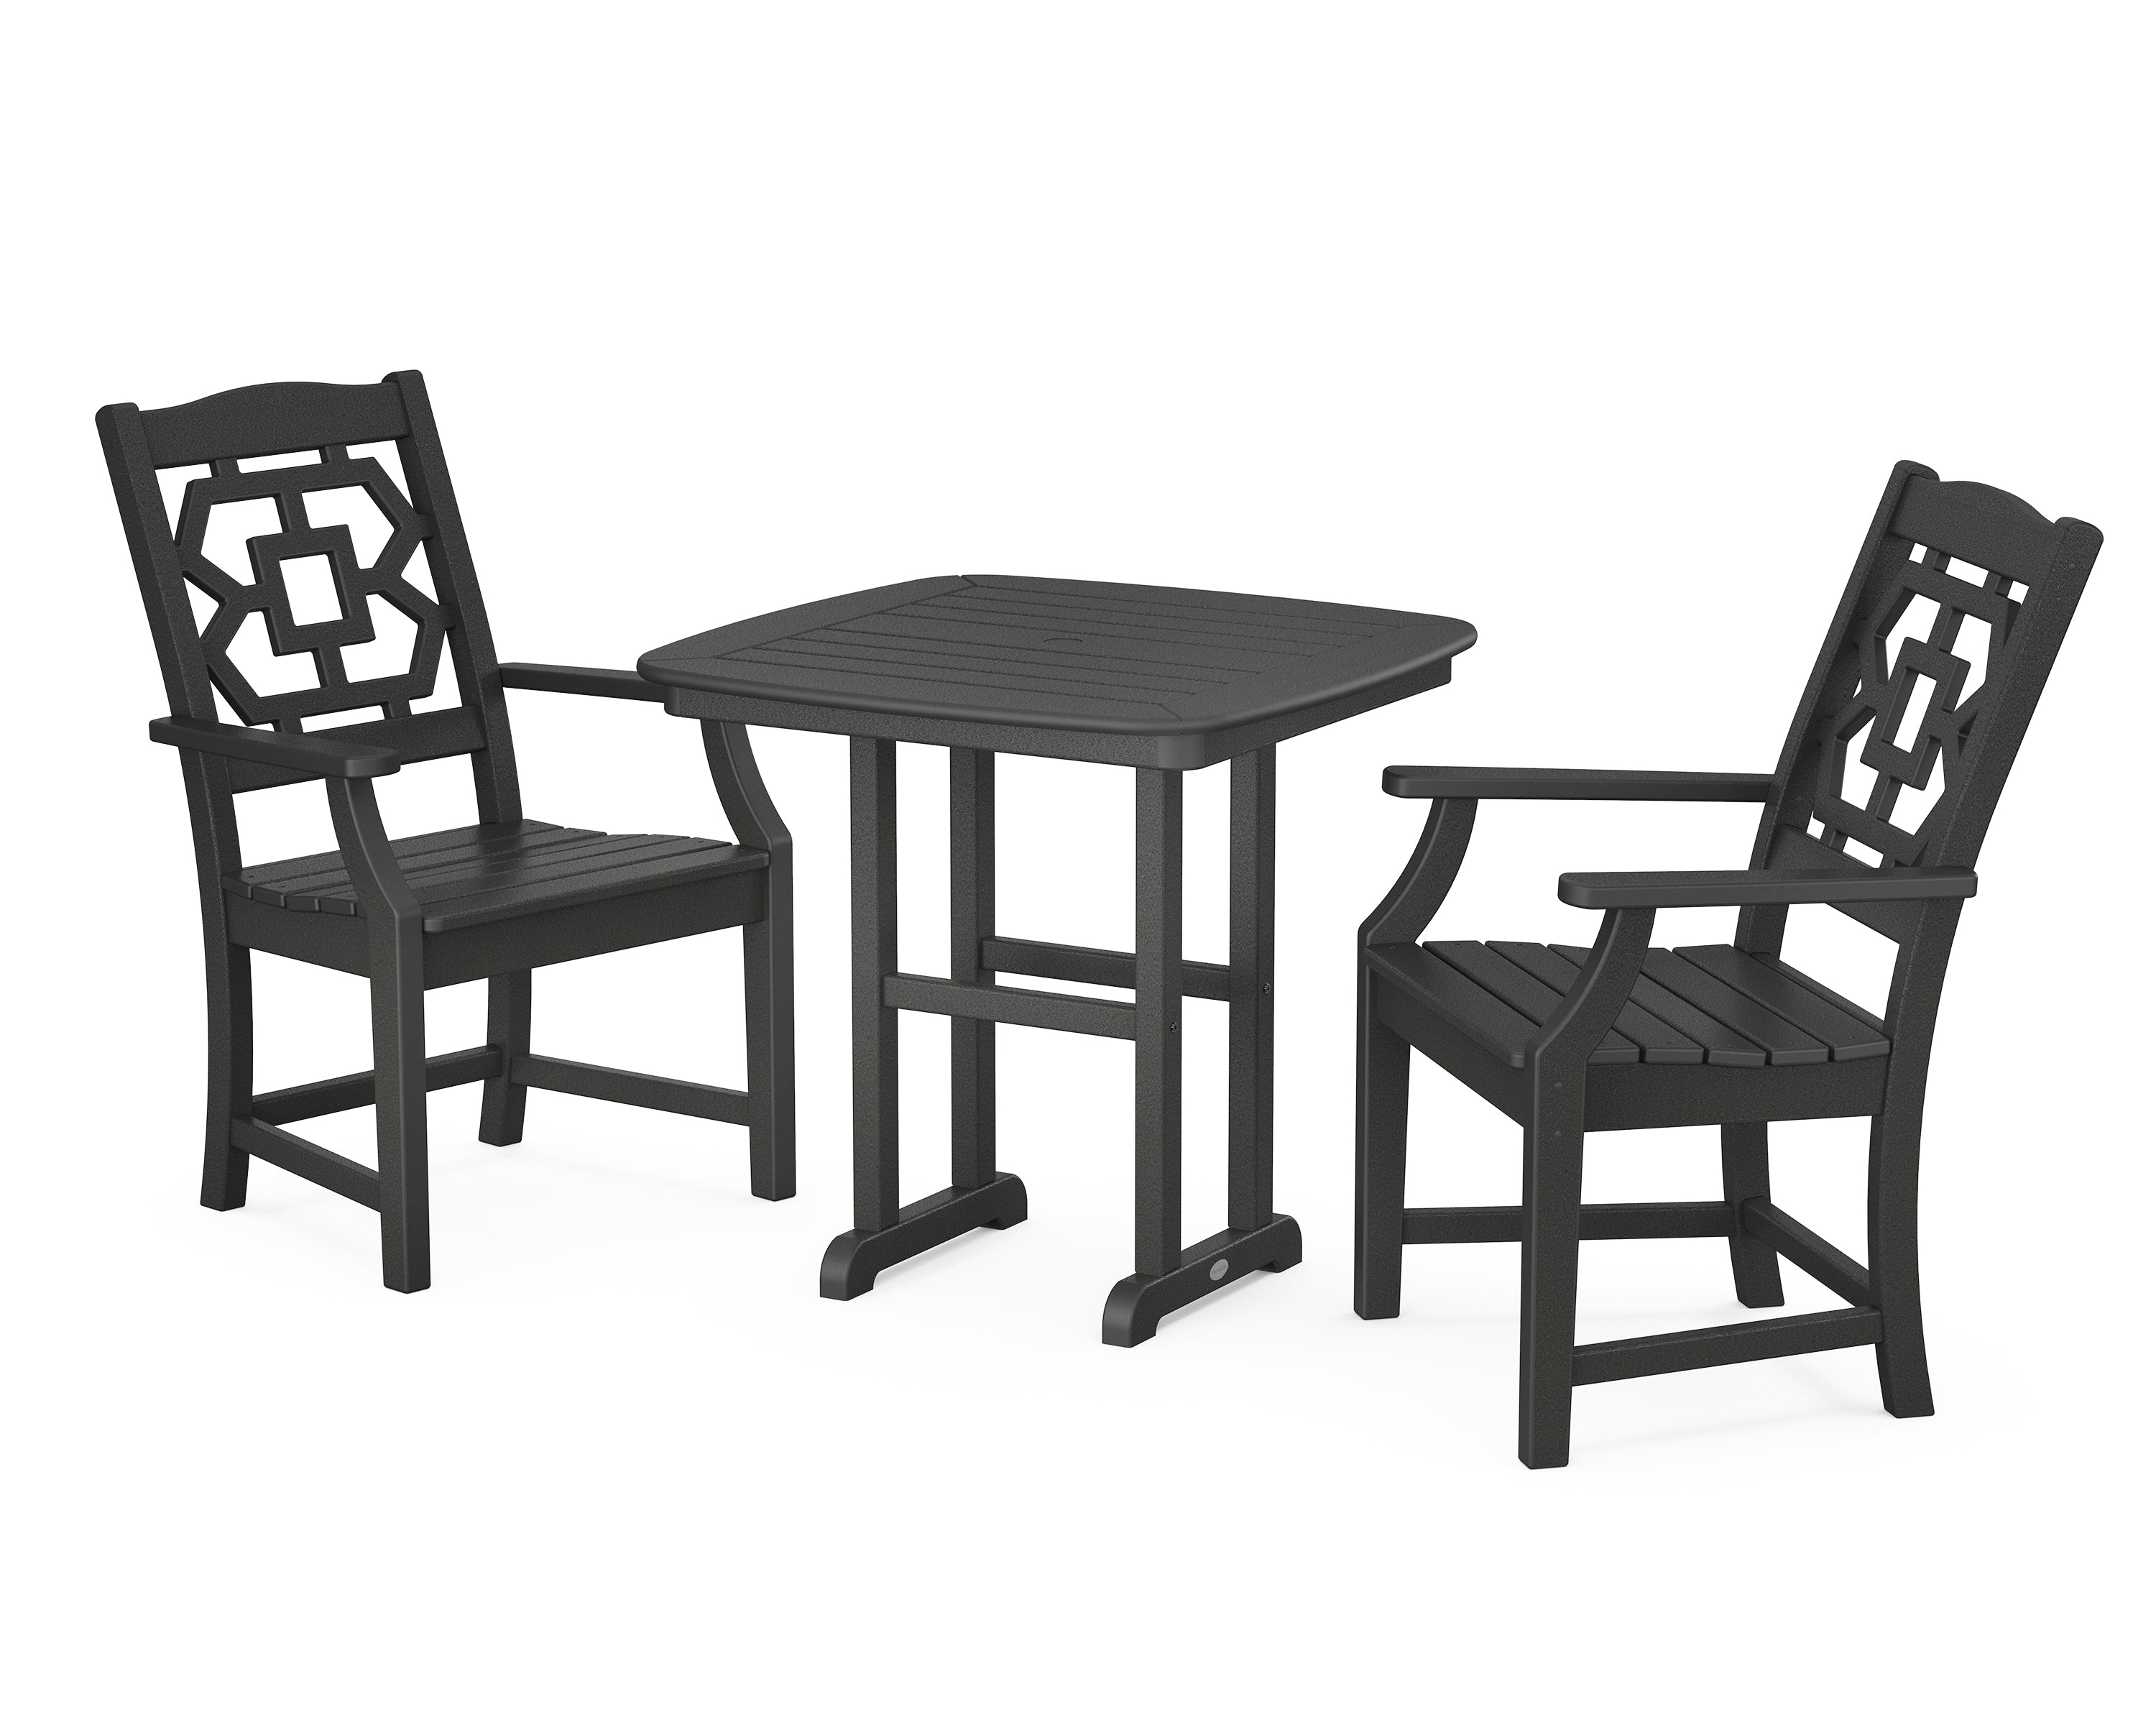 Martha Stewart by POLYWOOD® Chinoiserie 3-Piece Dining Set in Black